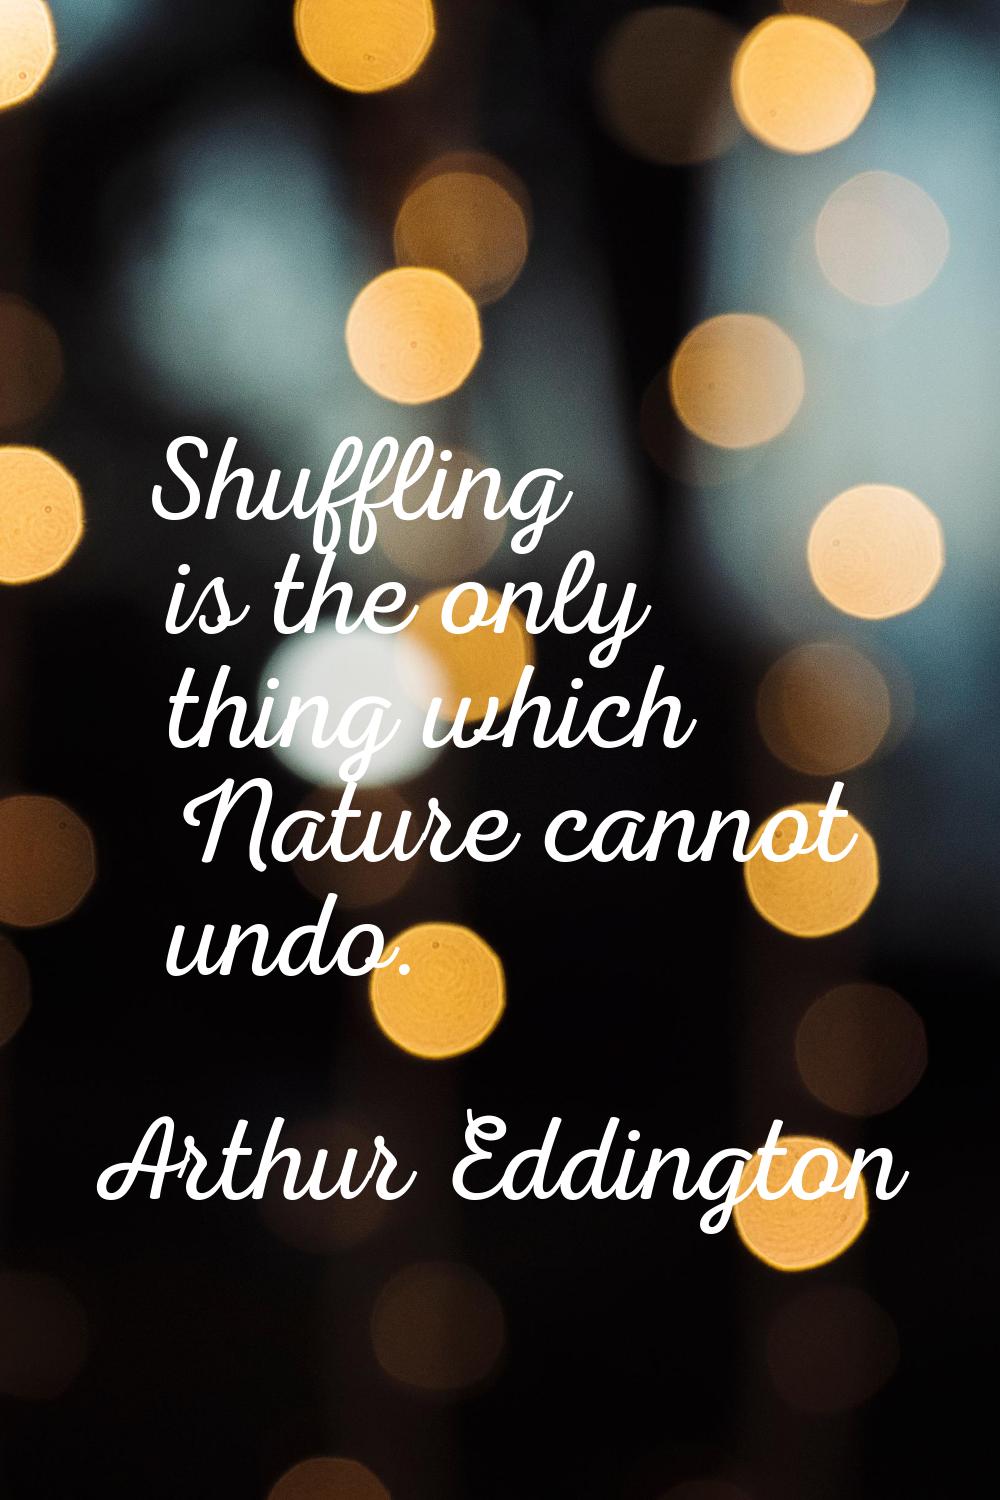 Shuffling is the only thing which Nature cannot undo.